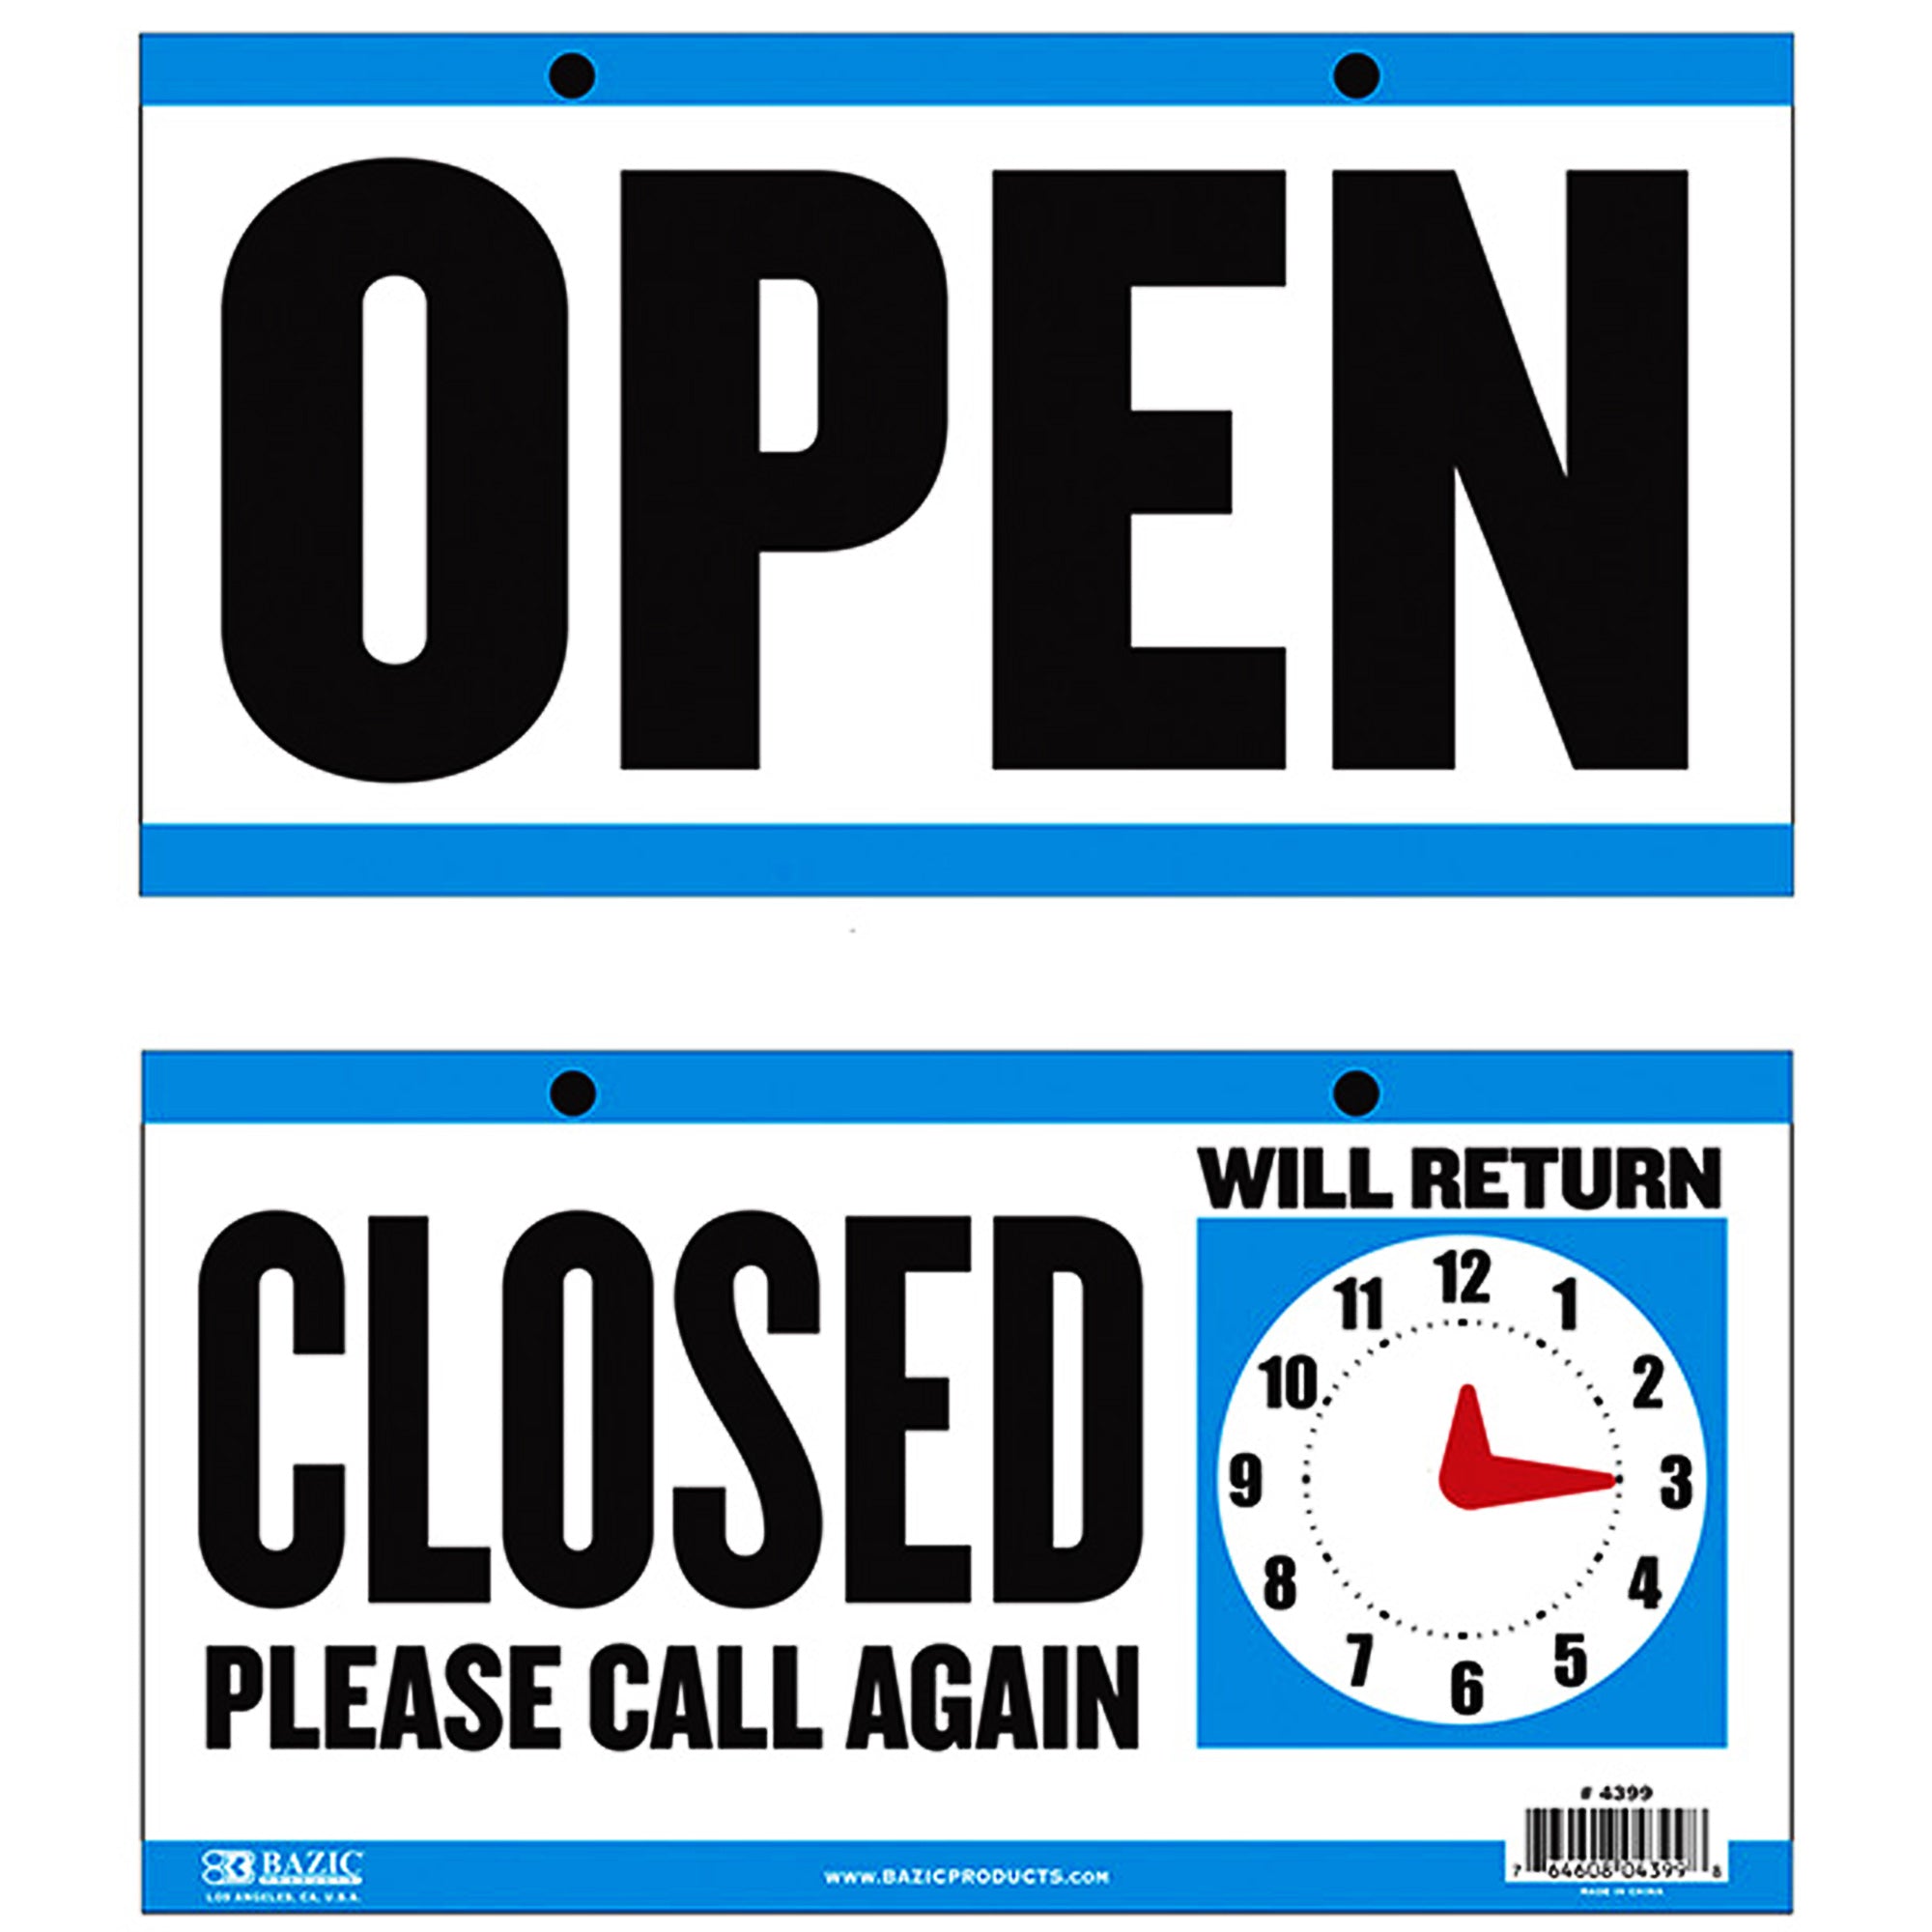  "OPEN" sign on back.